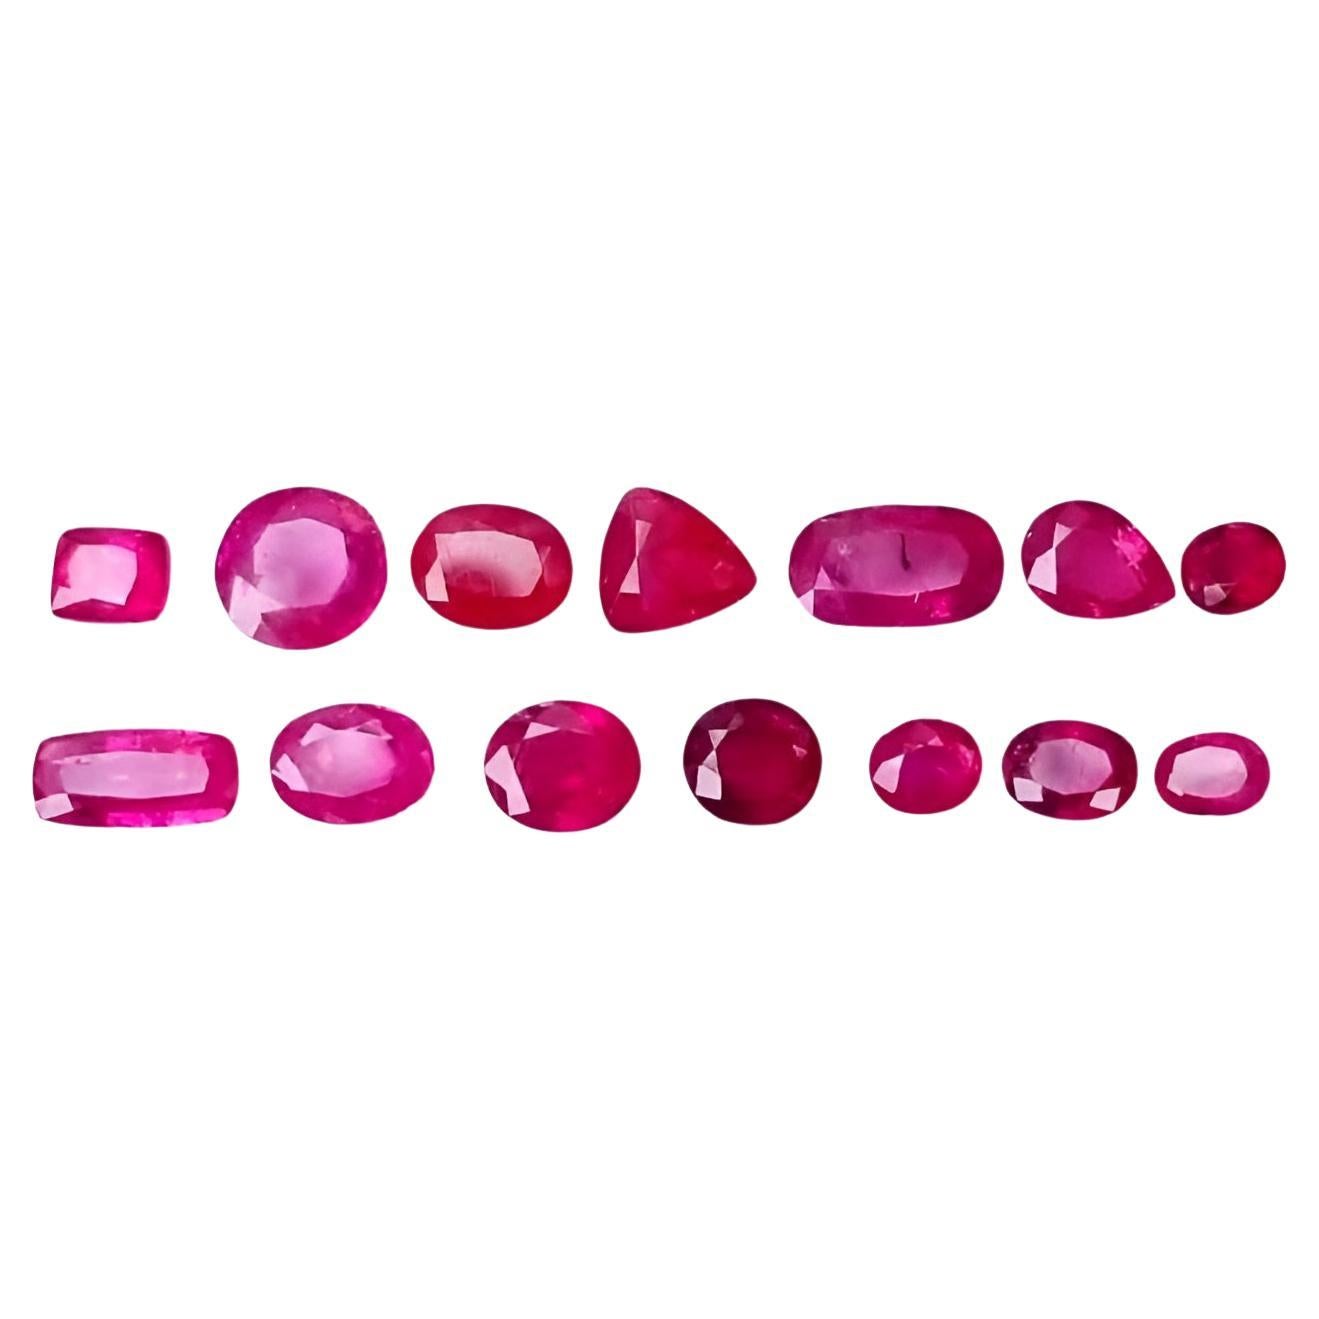 10.05 Carats Faceted Pink Ruby Stone Lot Natural Gemstones from Afghanistan 